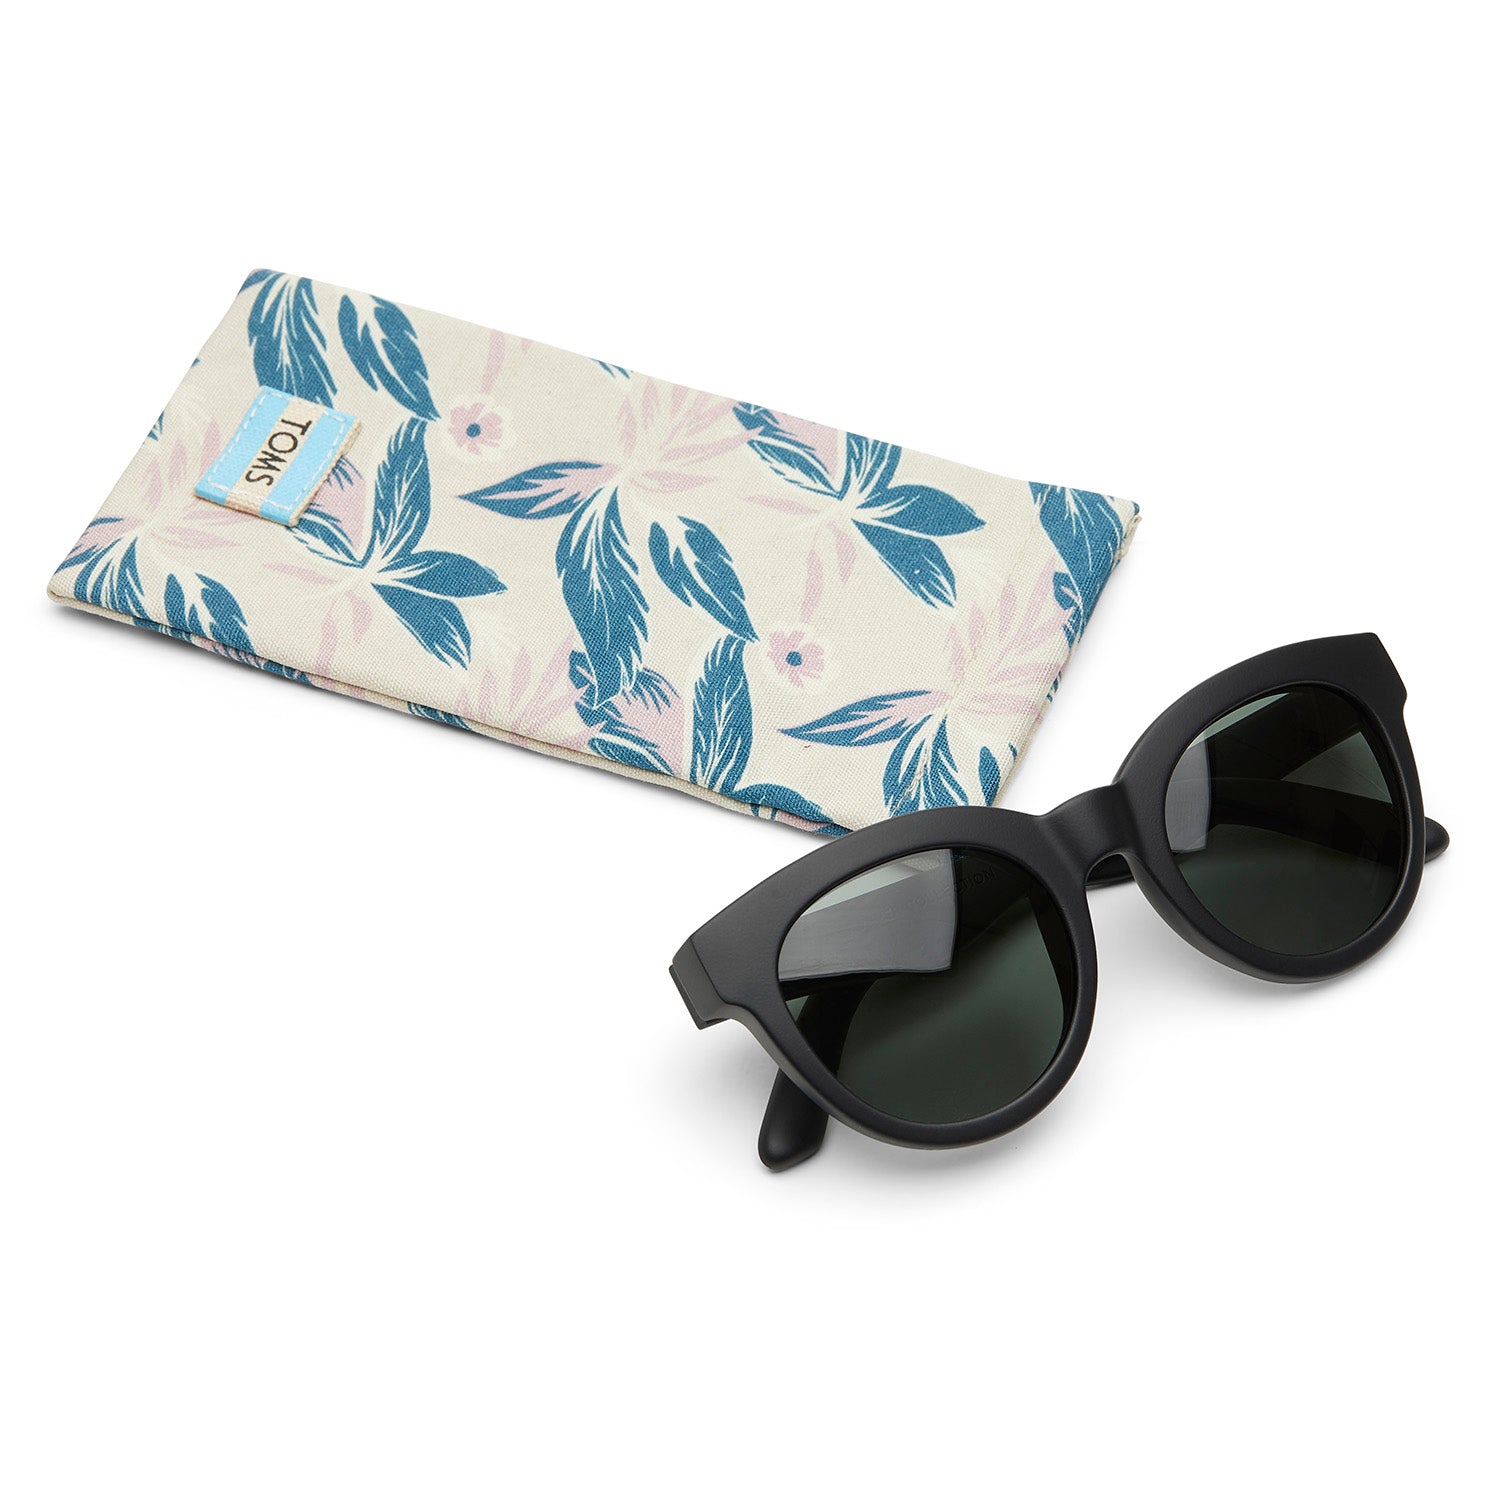 Florentin Black/Green Sunglasses-TOMS® India Official Site